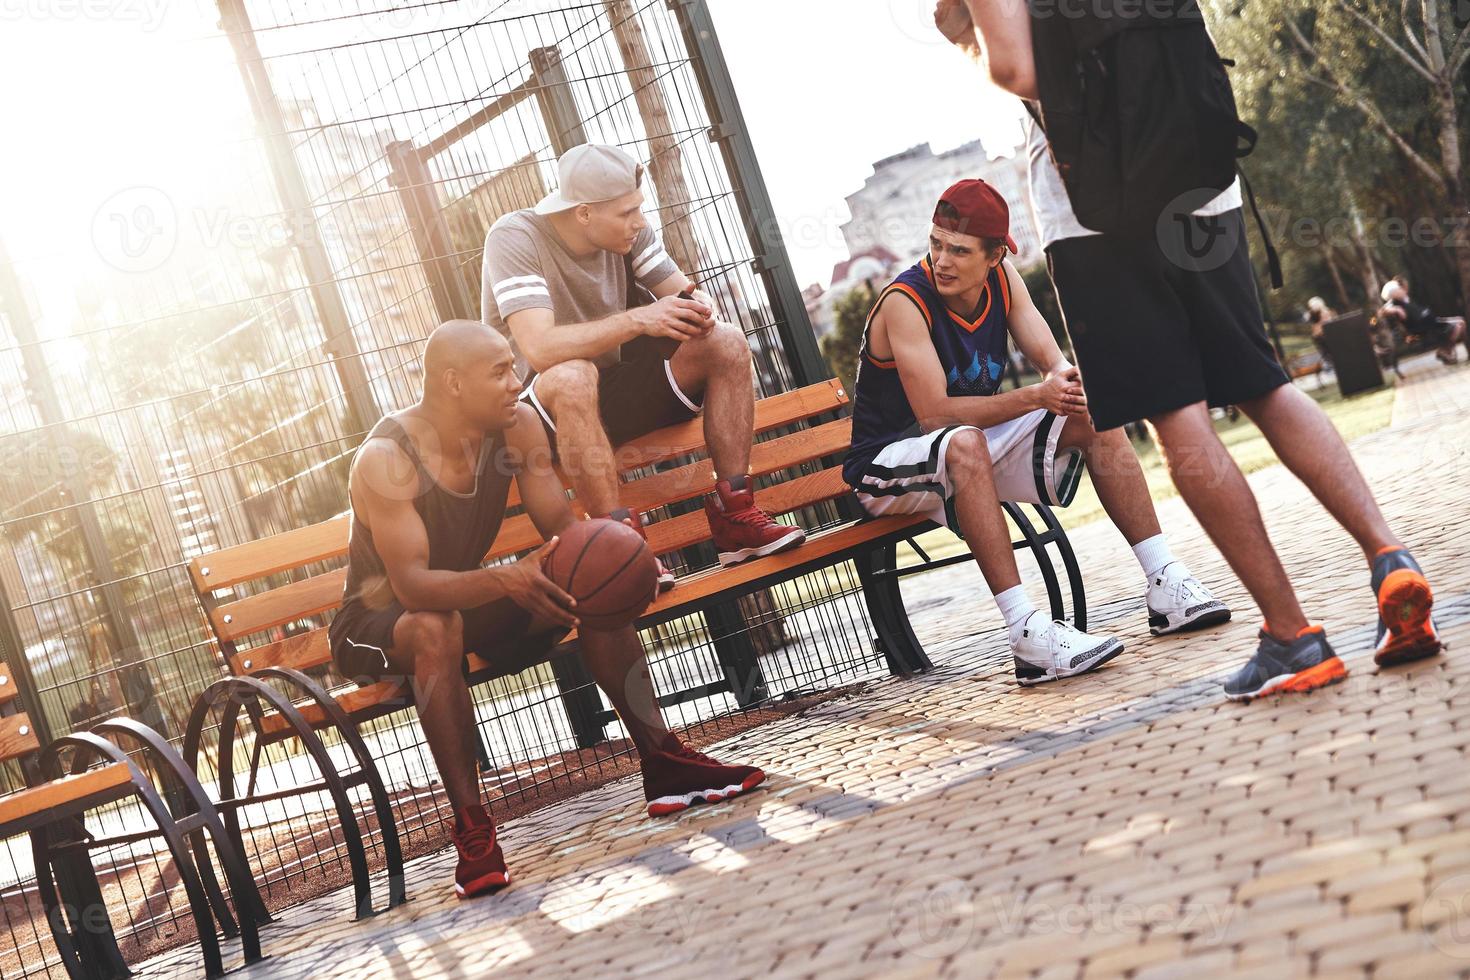 Weekend activities. Group of young men in sports clothing talking while spending time outdoors photo